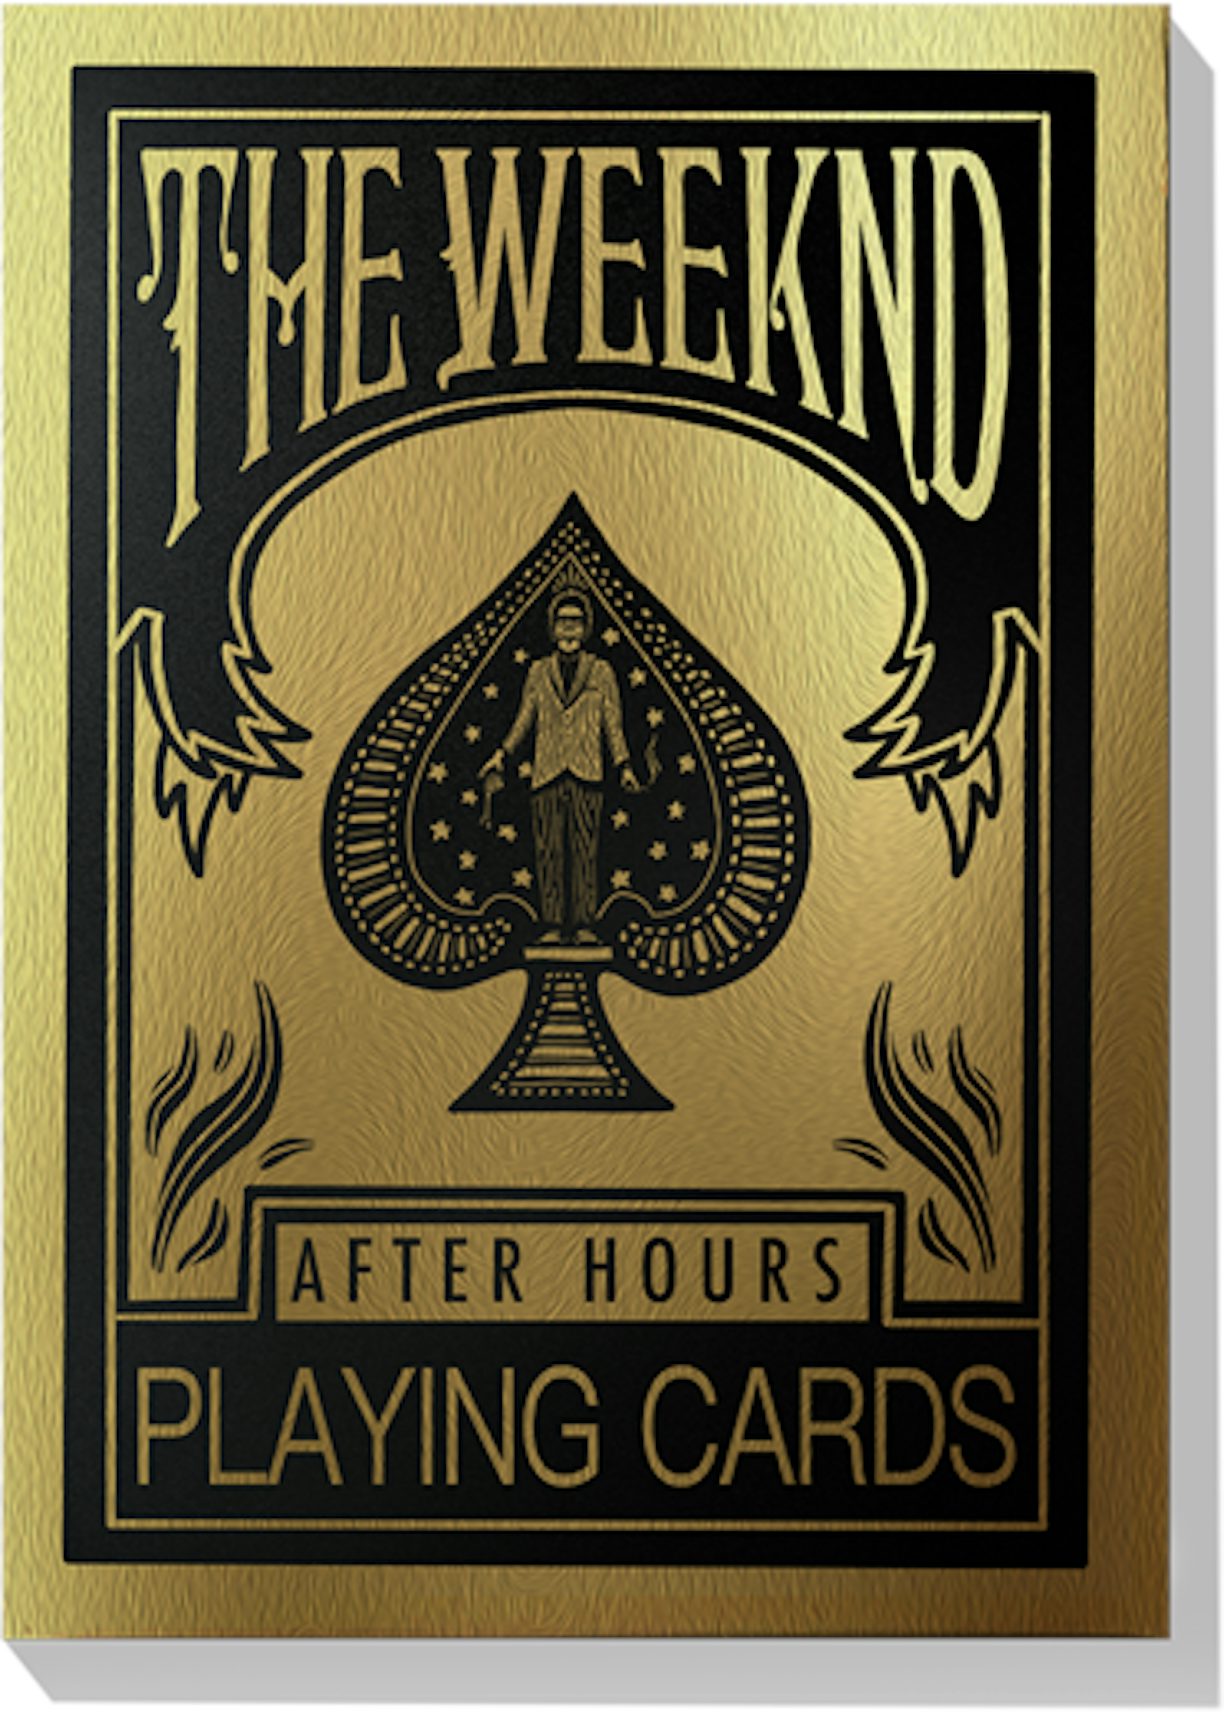 Versace Home Decks of playing cards, Men's Accessorie